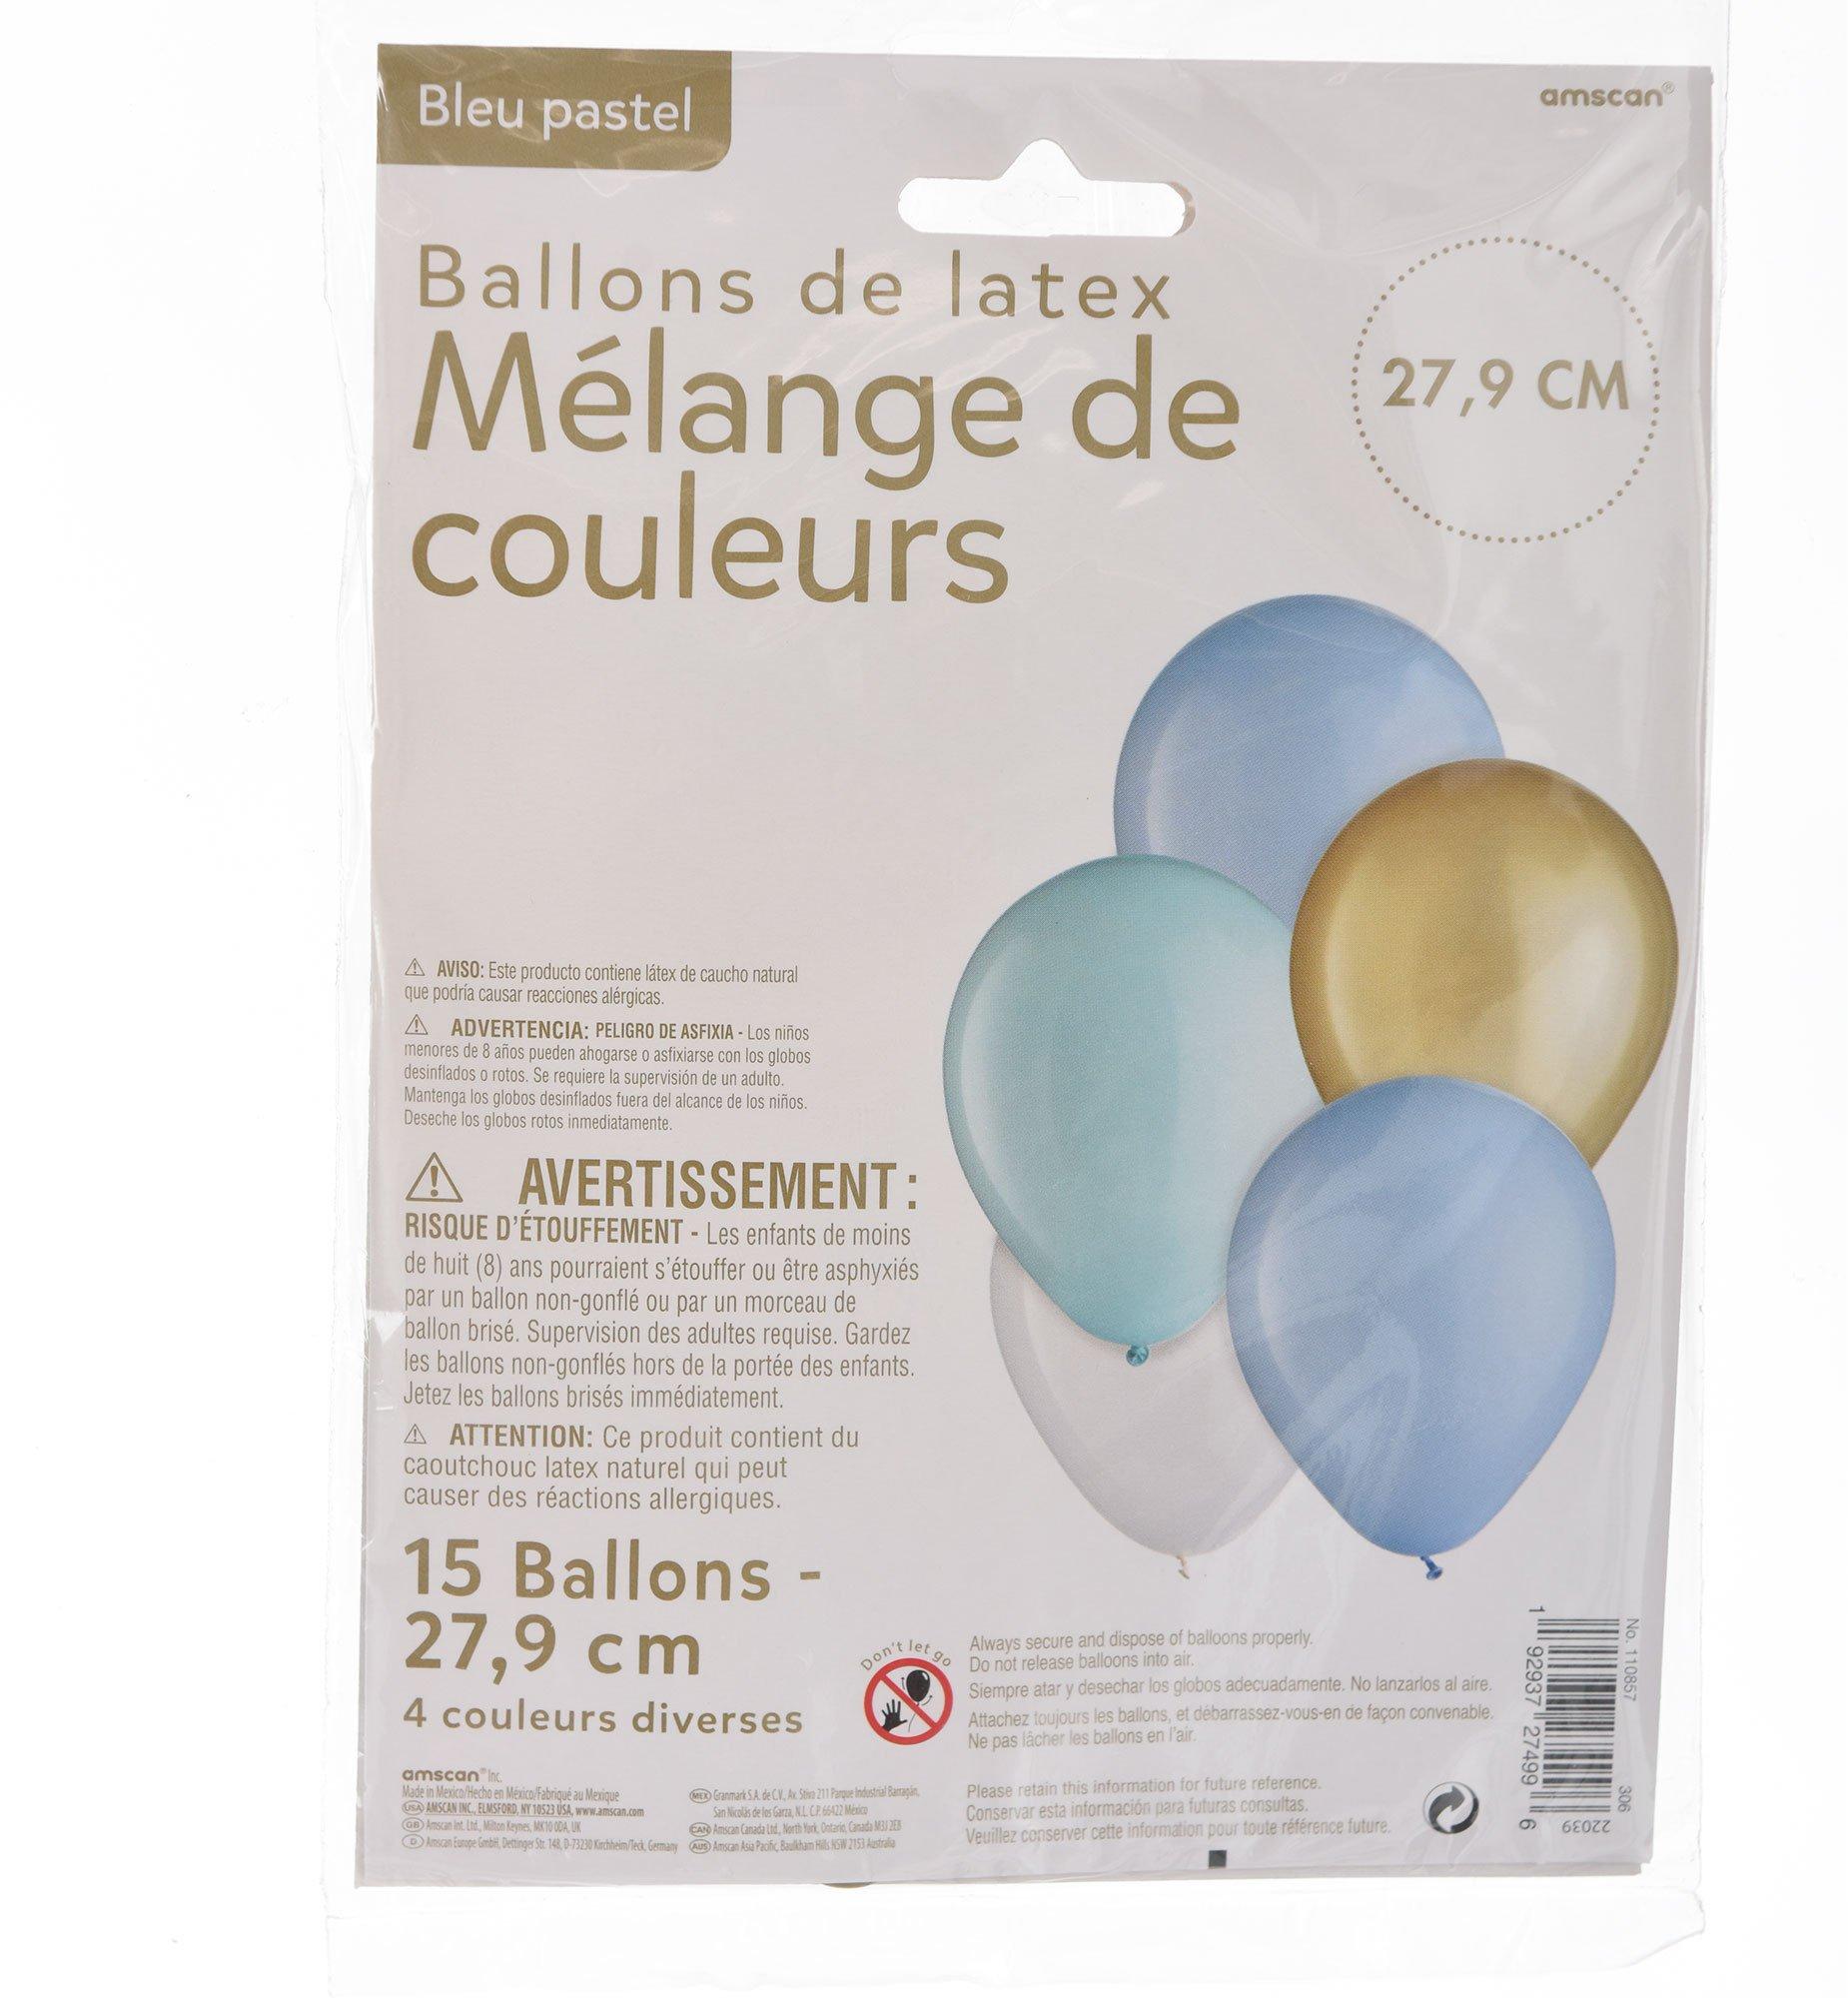 15ct, 11in, Pastel Blue 4-Color Mix Latex Balloons - Blues, Gold & White